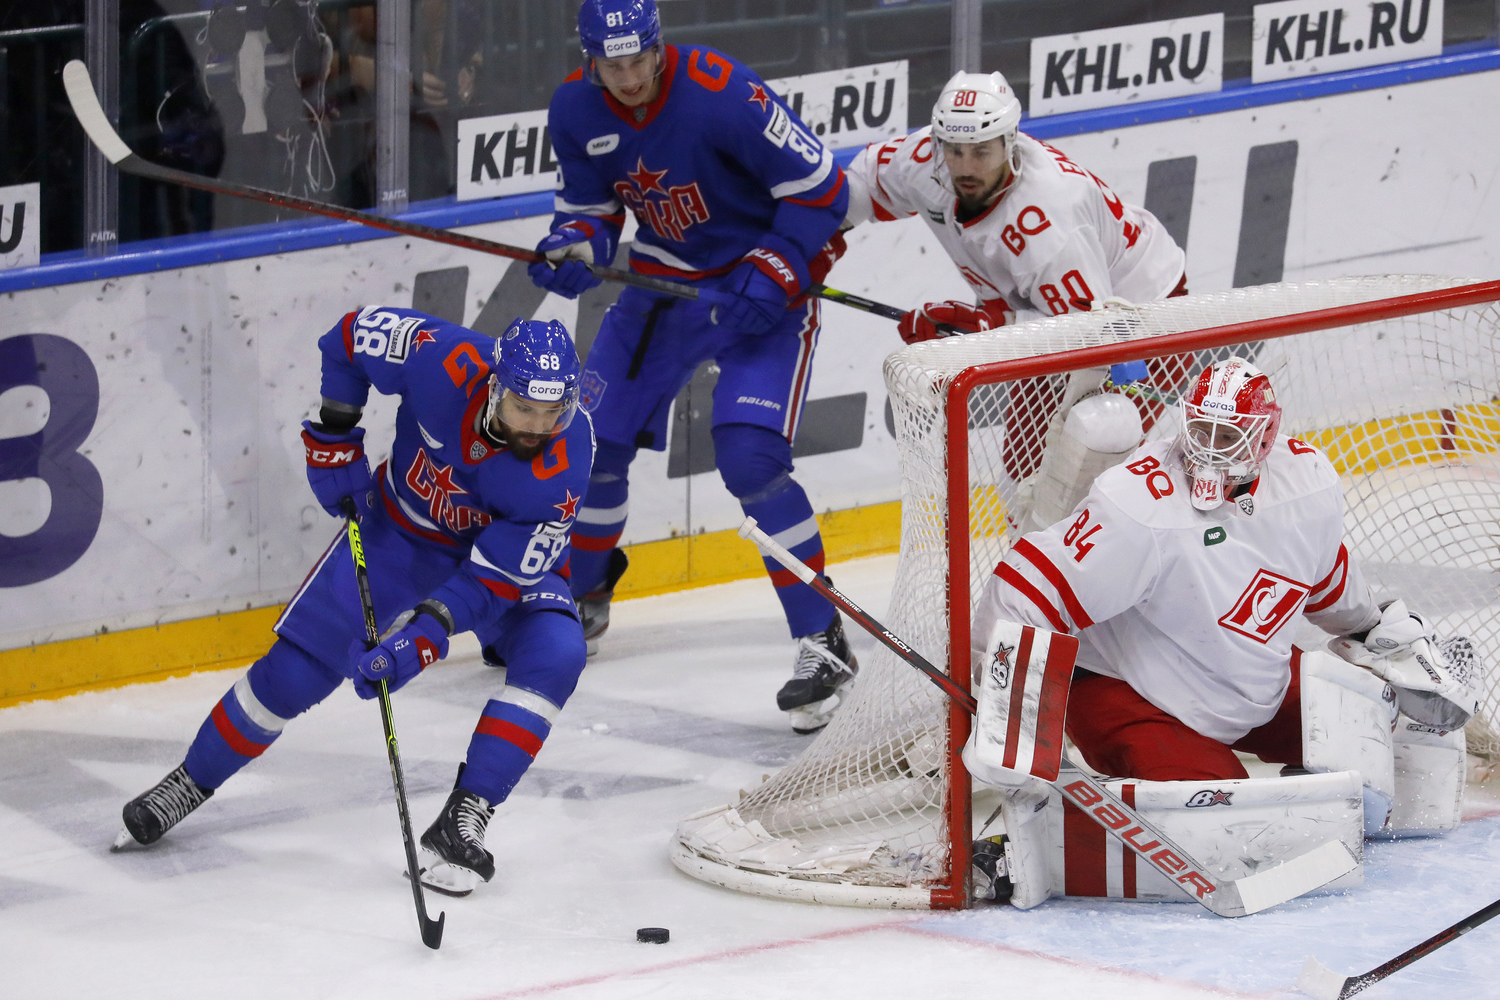 The fourth victory over Spartak this season: SKA beat the Muscovites with a score of 3:2